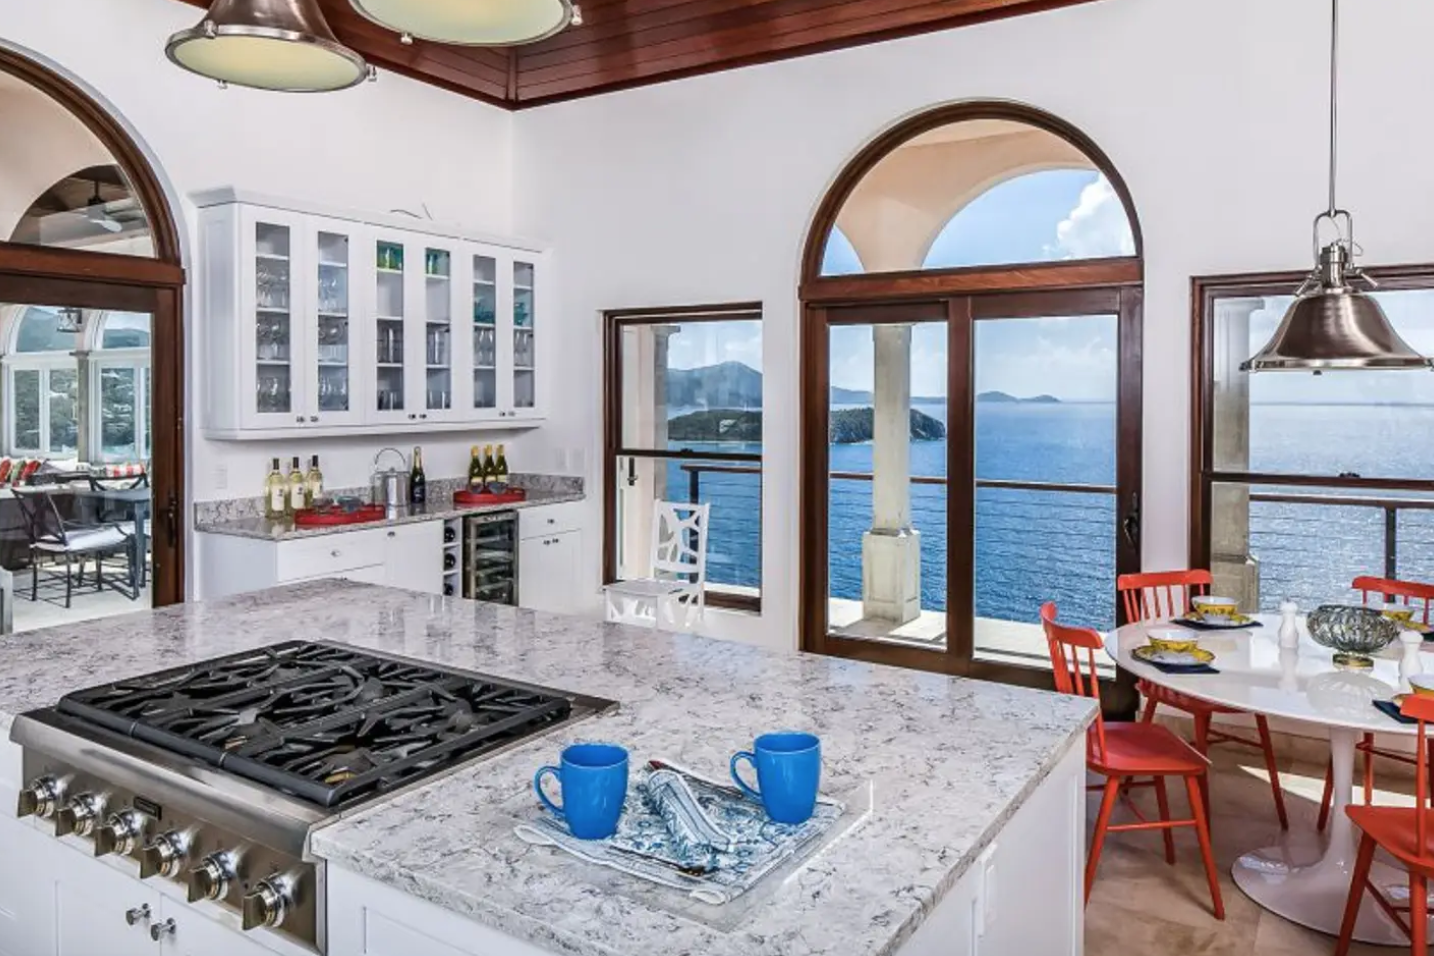 High-End Kitchen of "Finisterre" - a two-acre, three-building complex on St. John